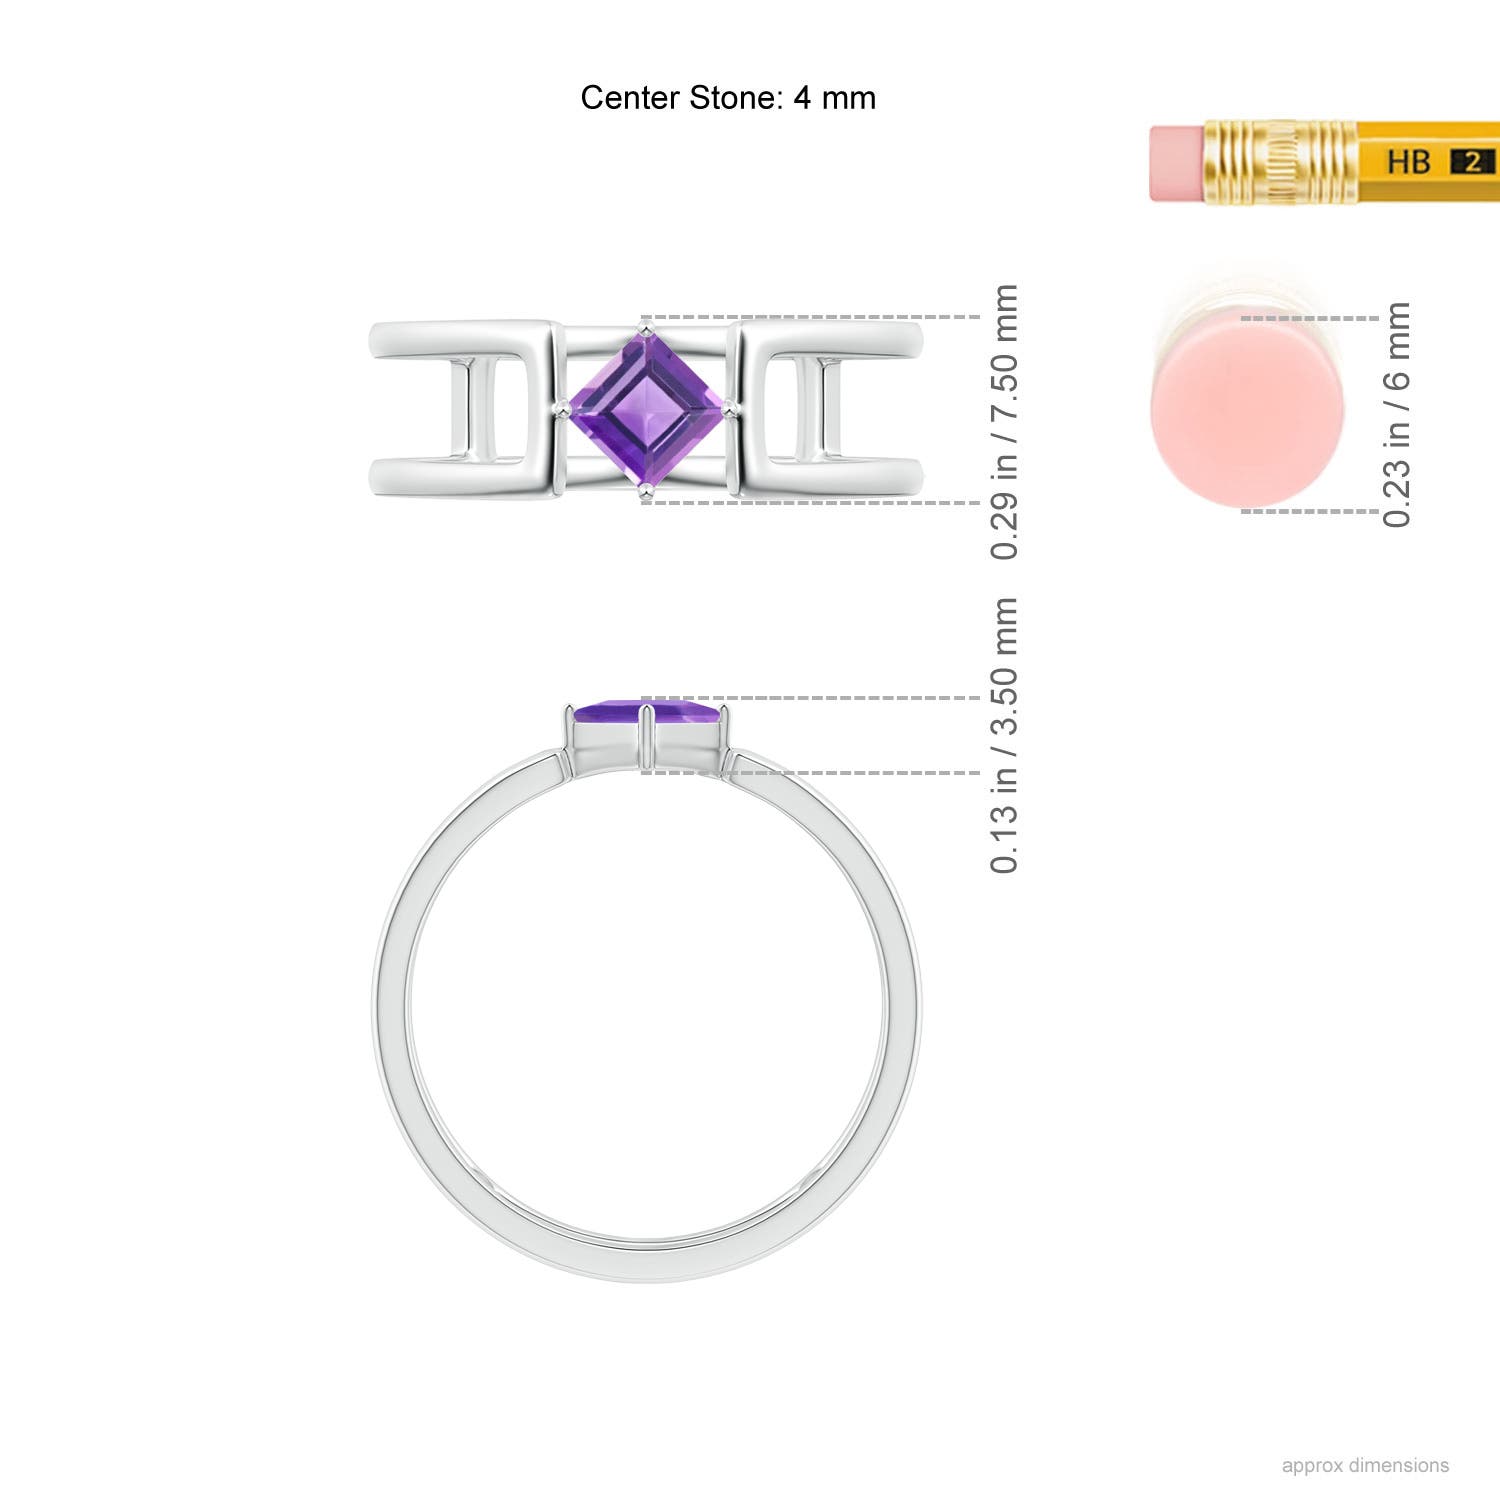 AA - Amethyst / 0.33 CT / 14 KT White Gold